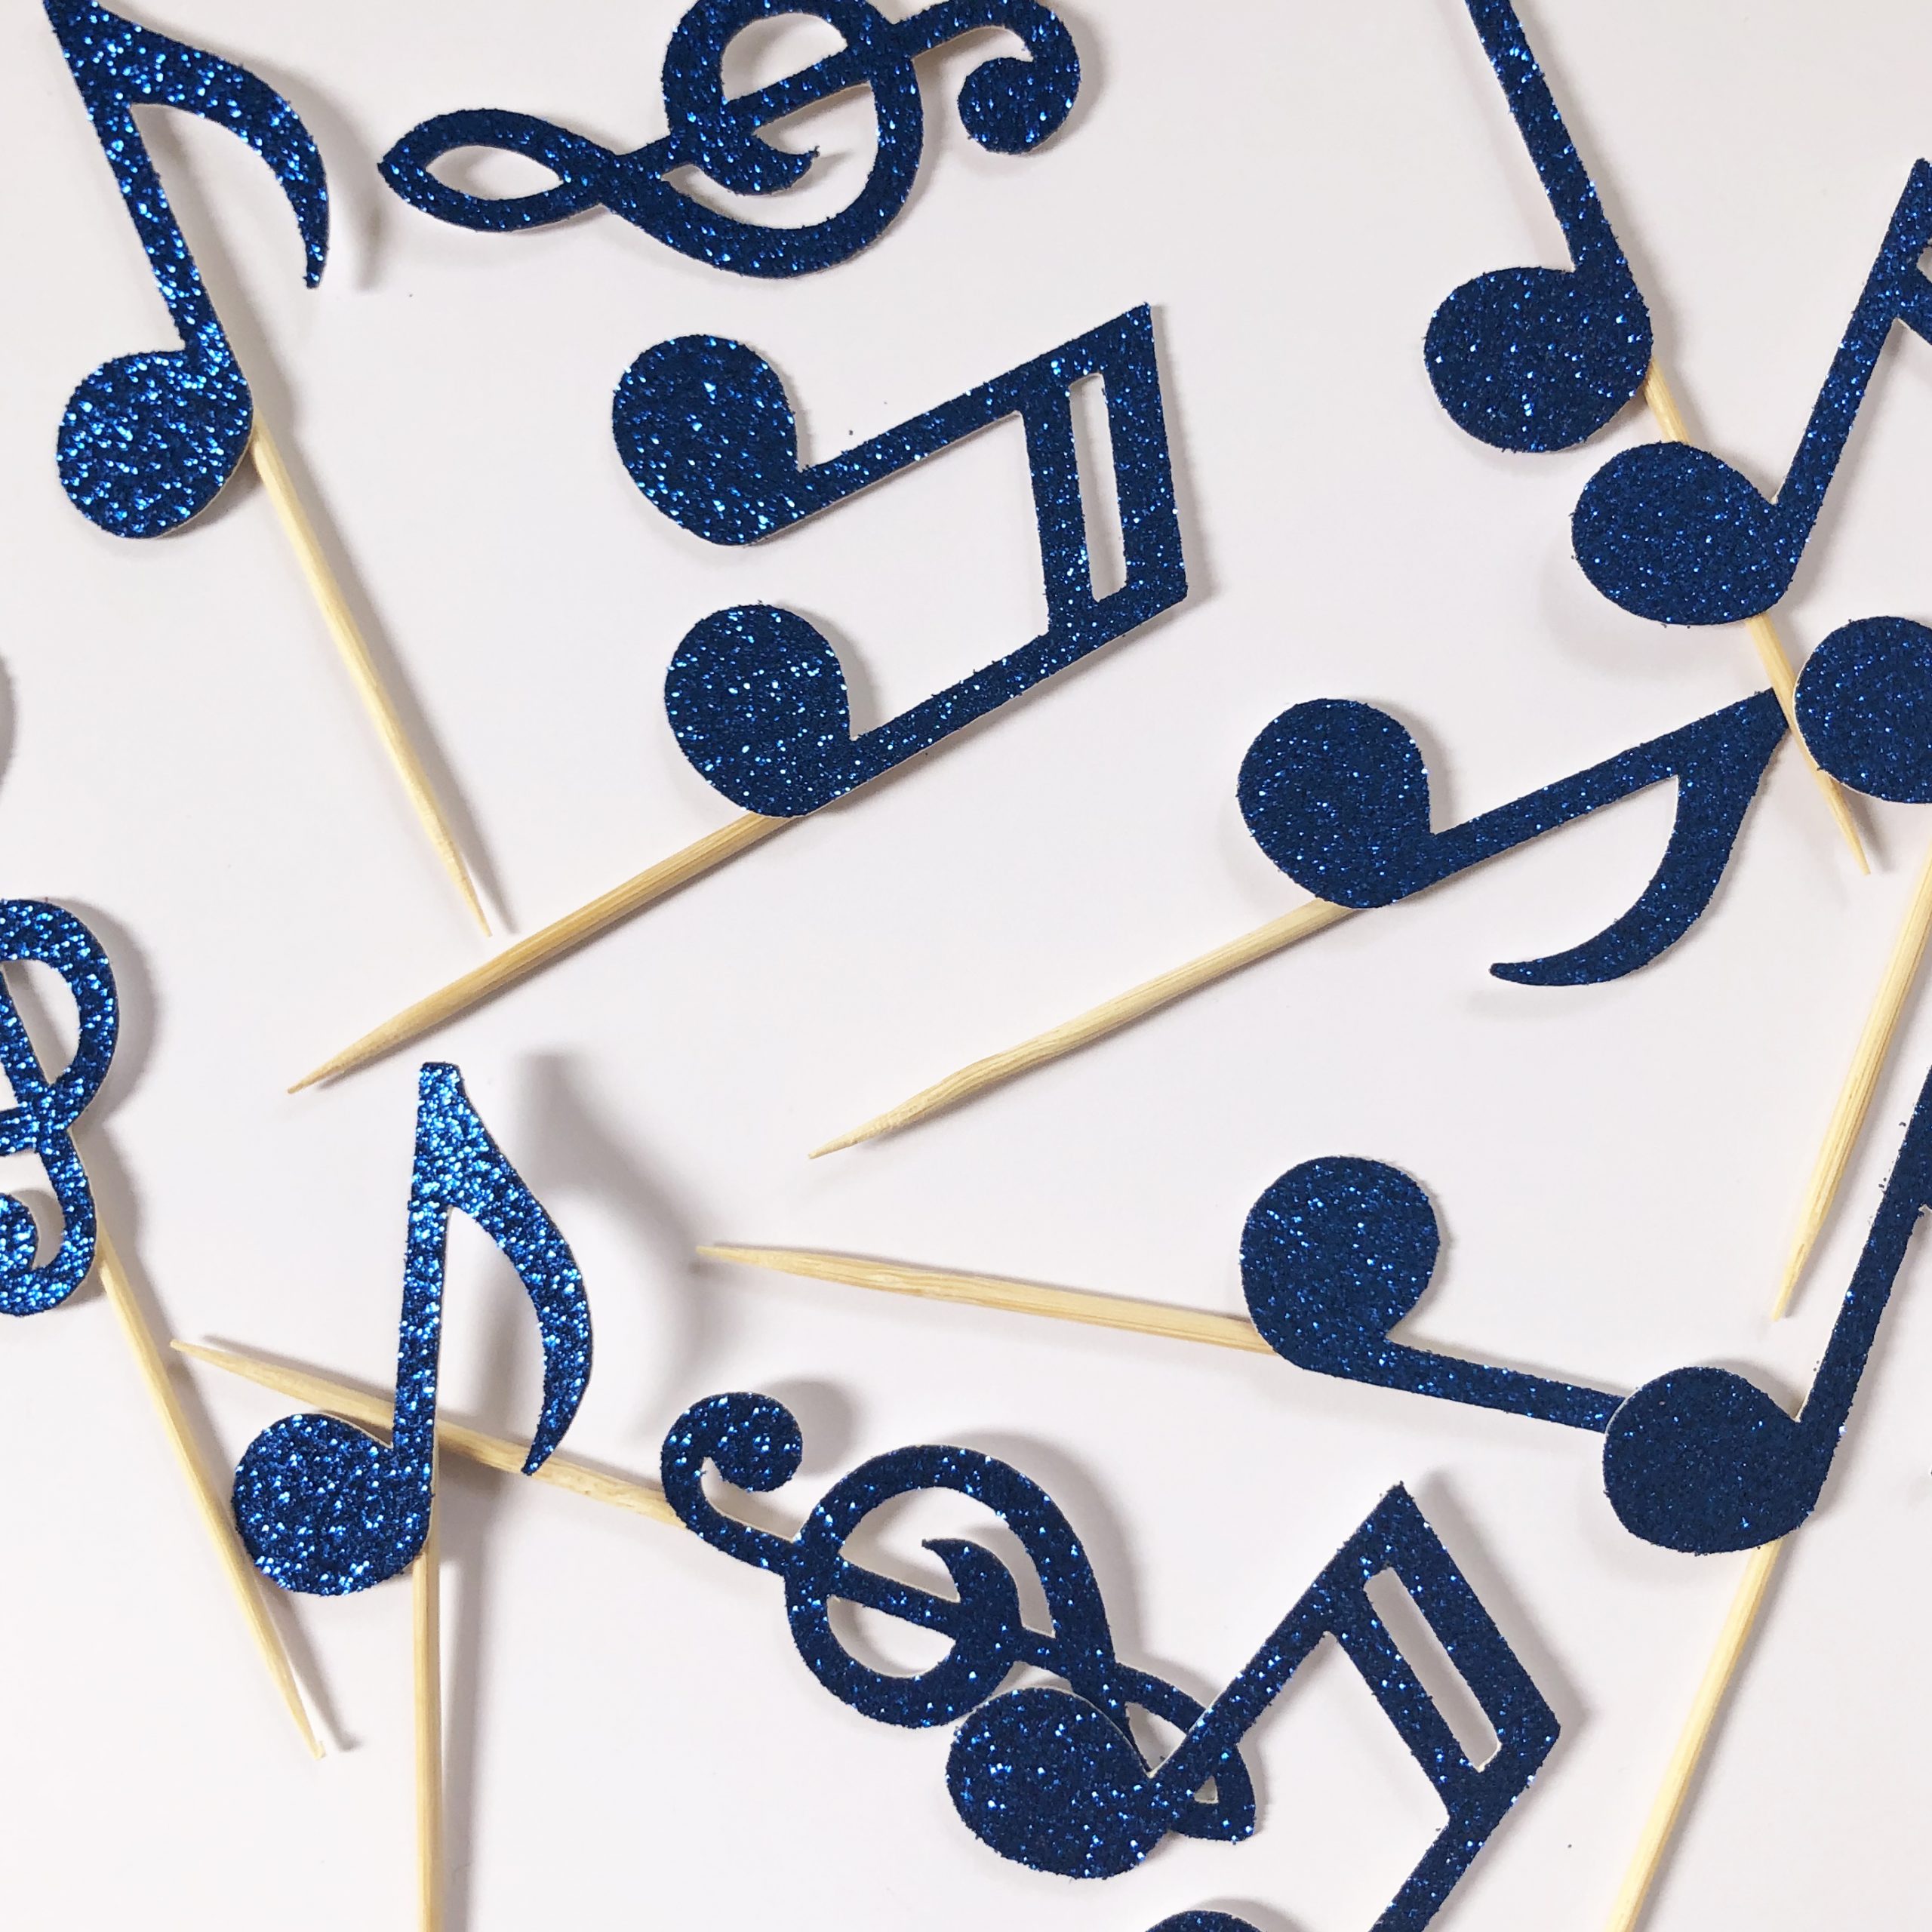 Music notes mini cupcake topper - Cake Toppers